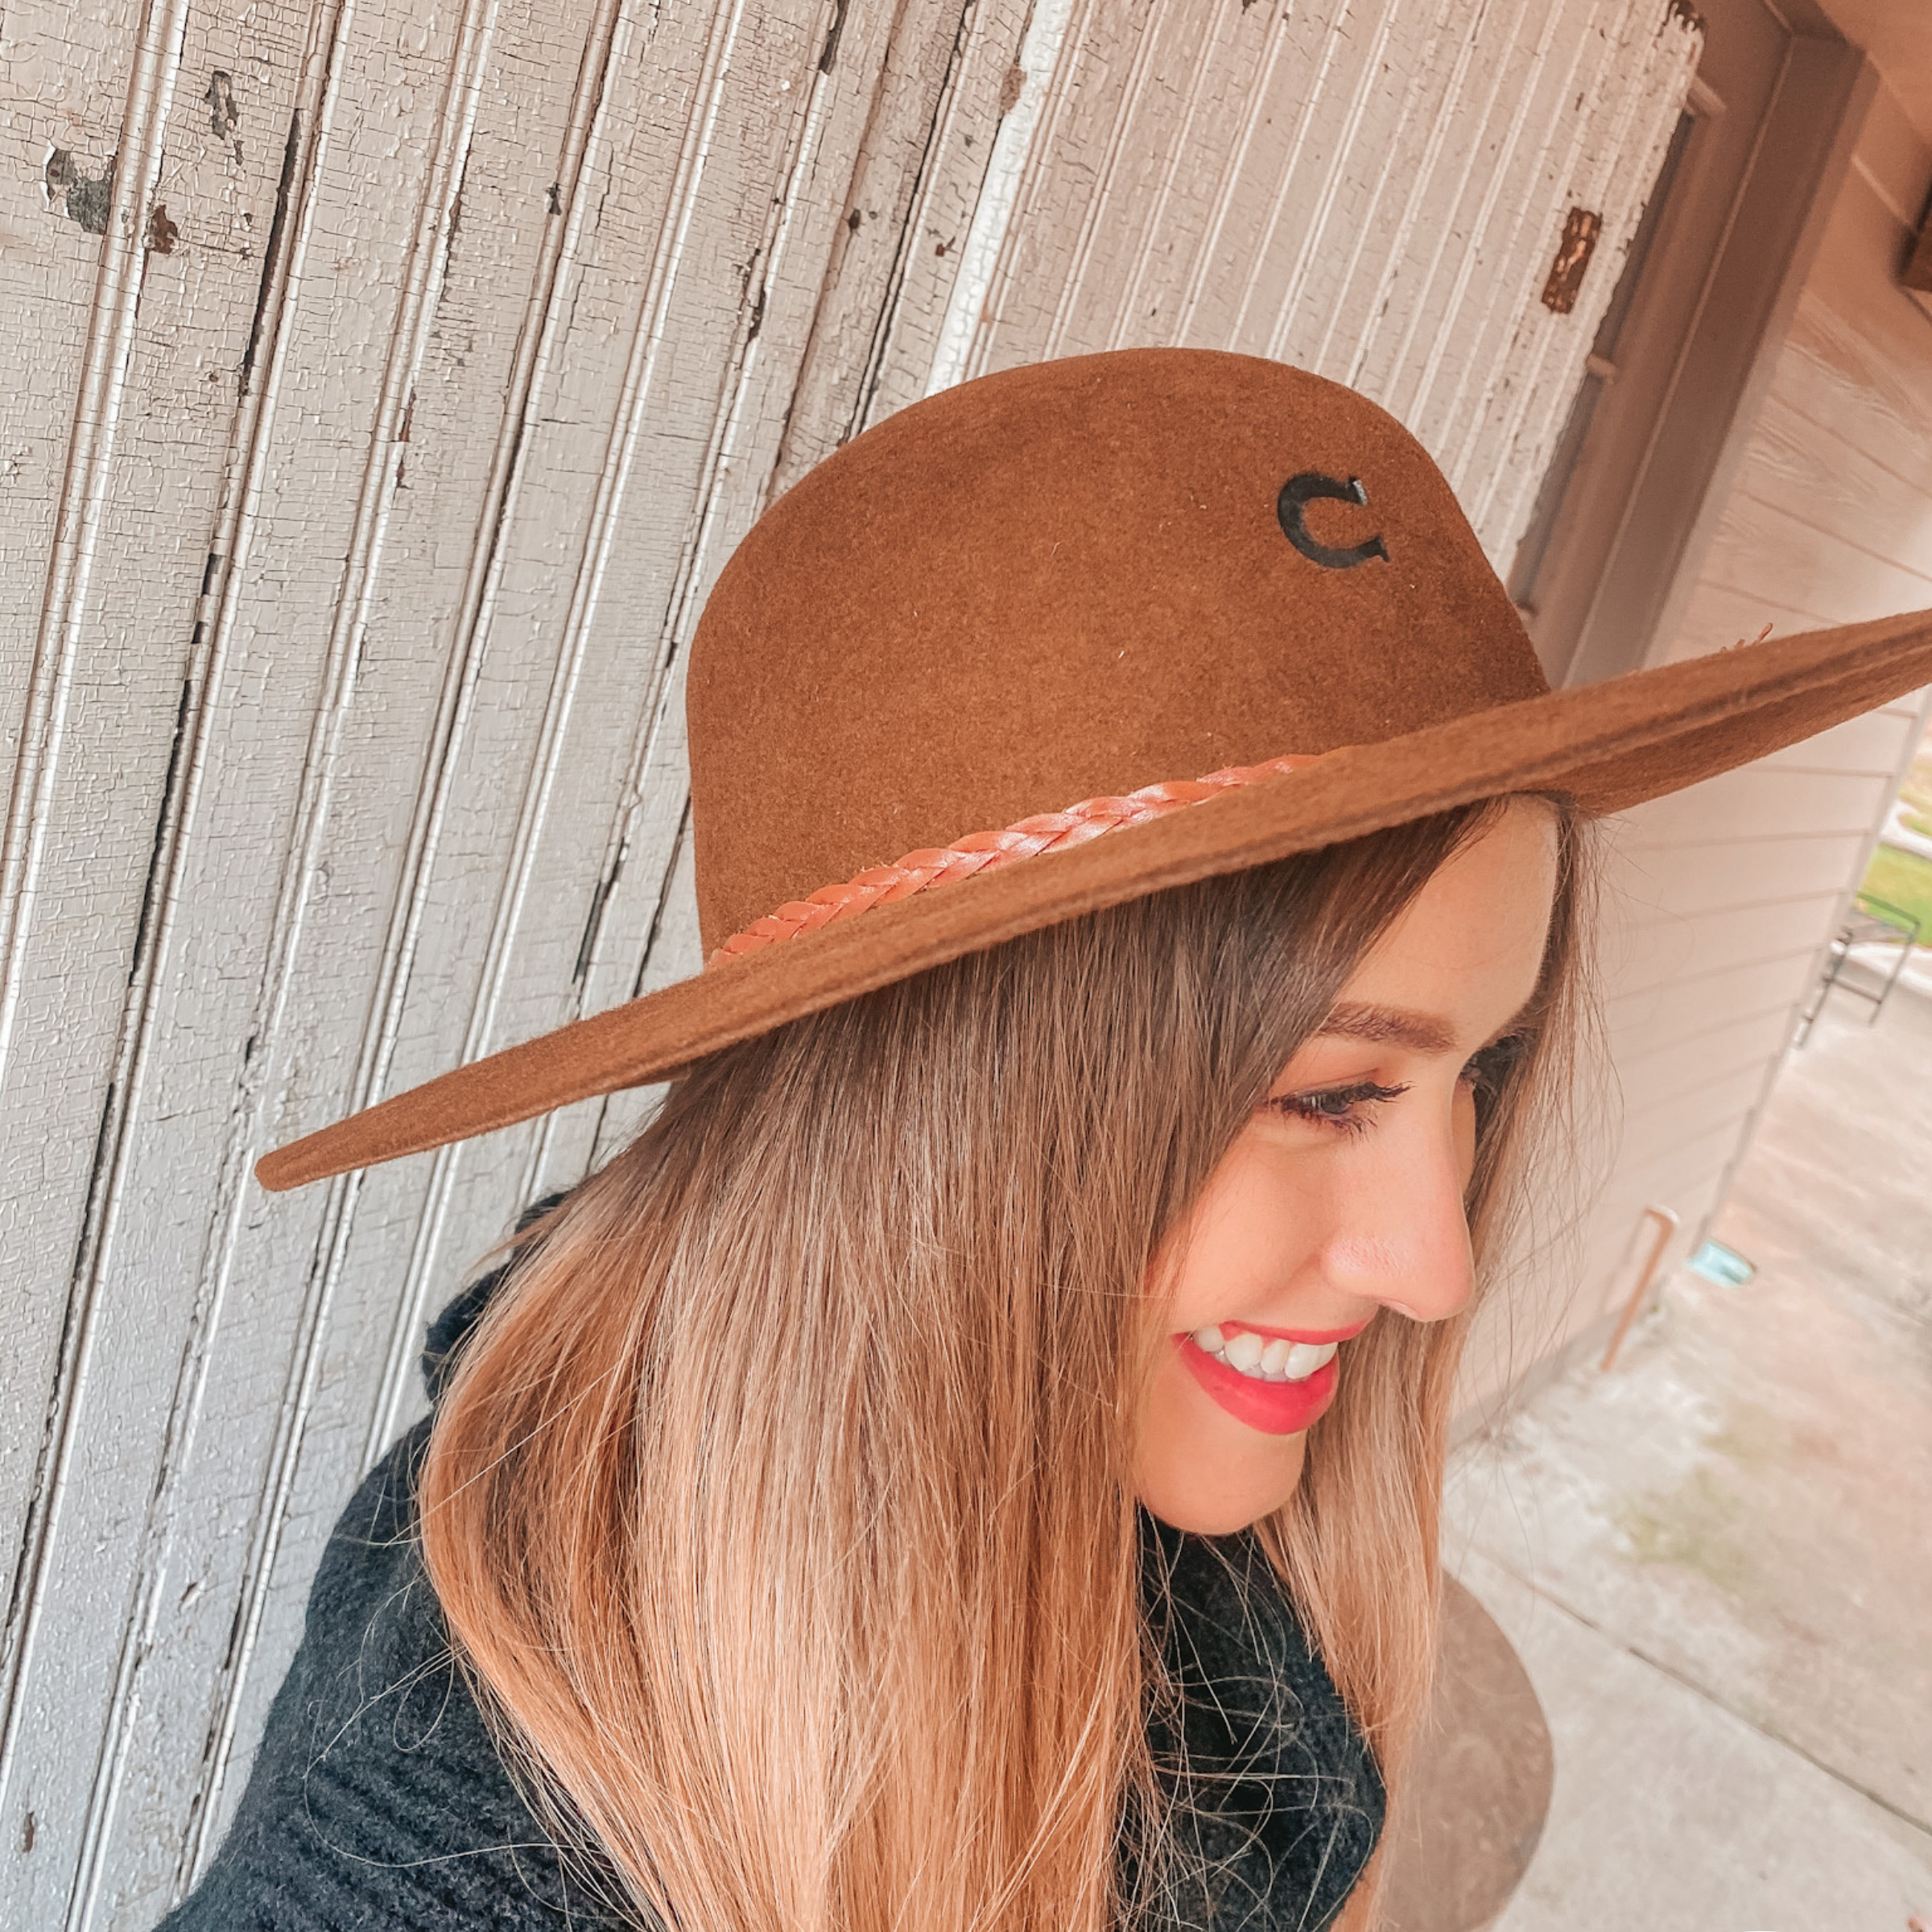 Charlie 1 Horse | Wanderlust Wool Felt Floppy Hat with Braided Band in Acorn - Giddy Up Glamour Boutique